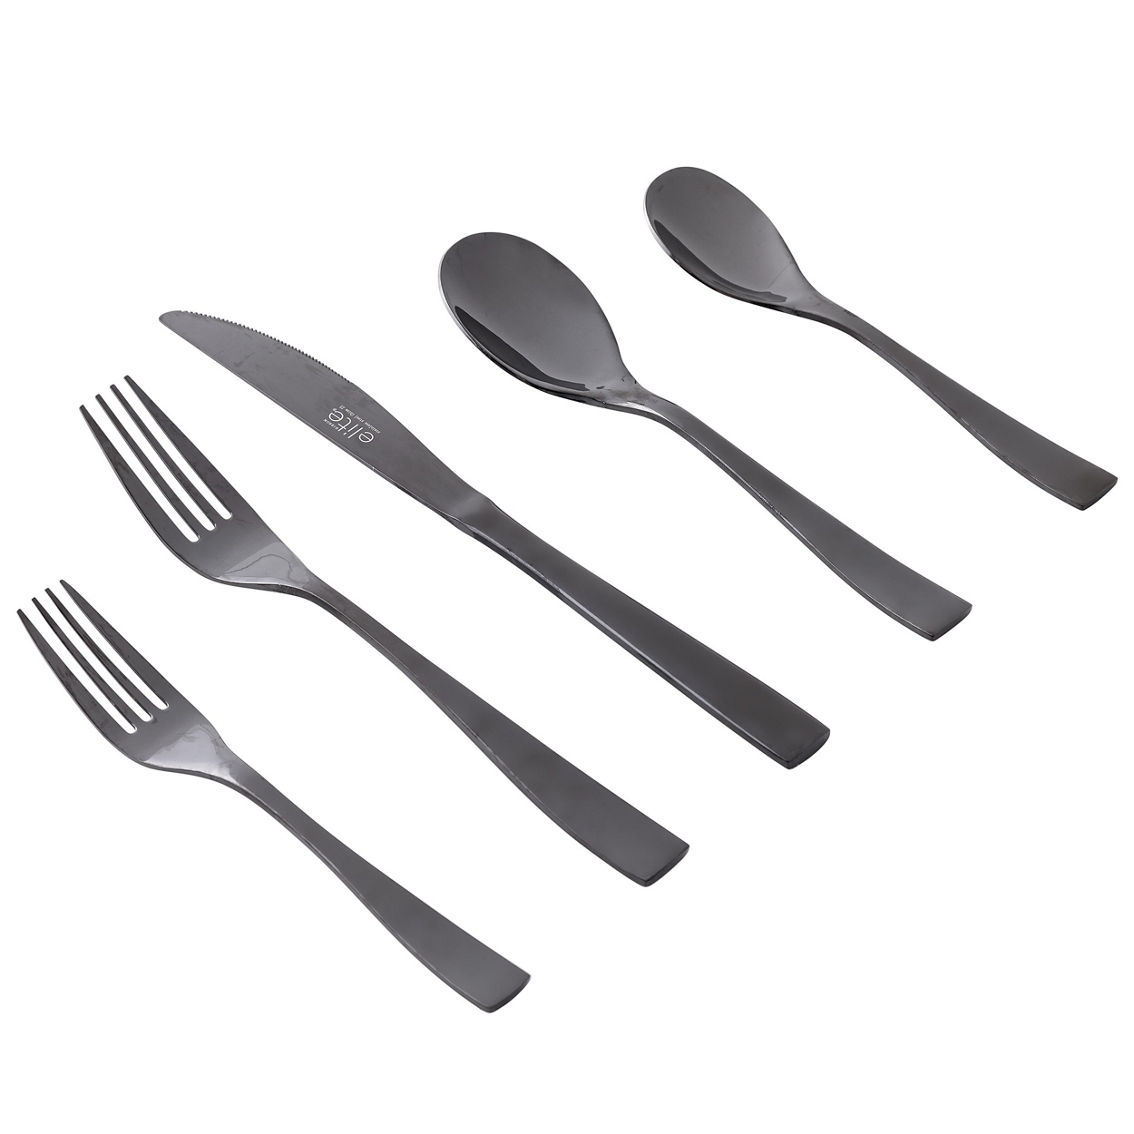 Gibson Home Holland Road 20 Piece Black Stainless Steel Flatware Set - Image 2 of 4